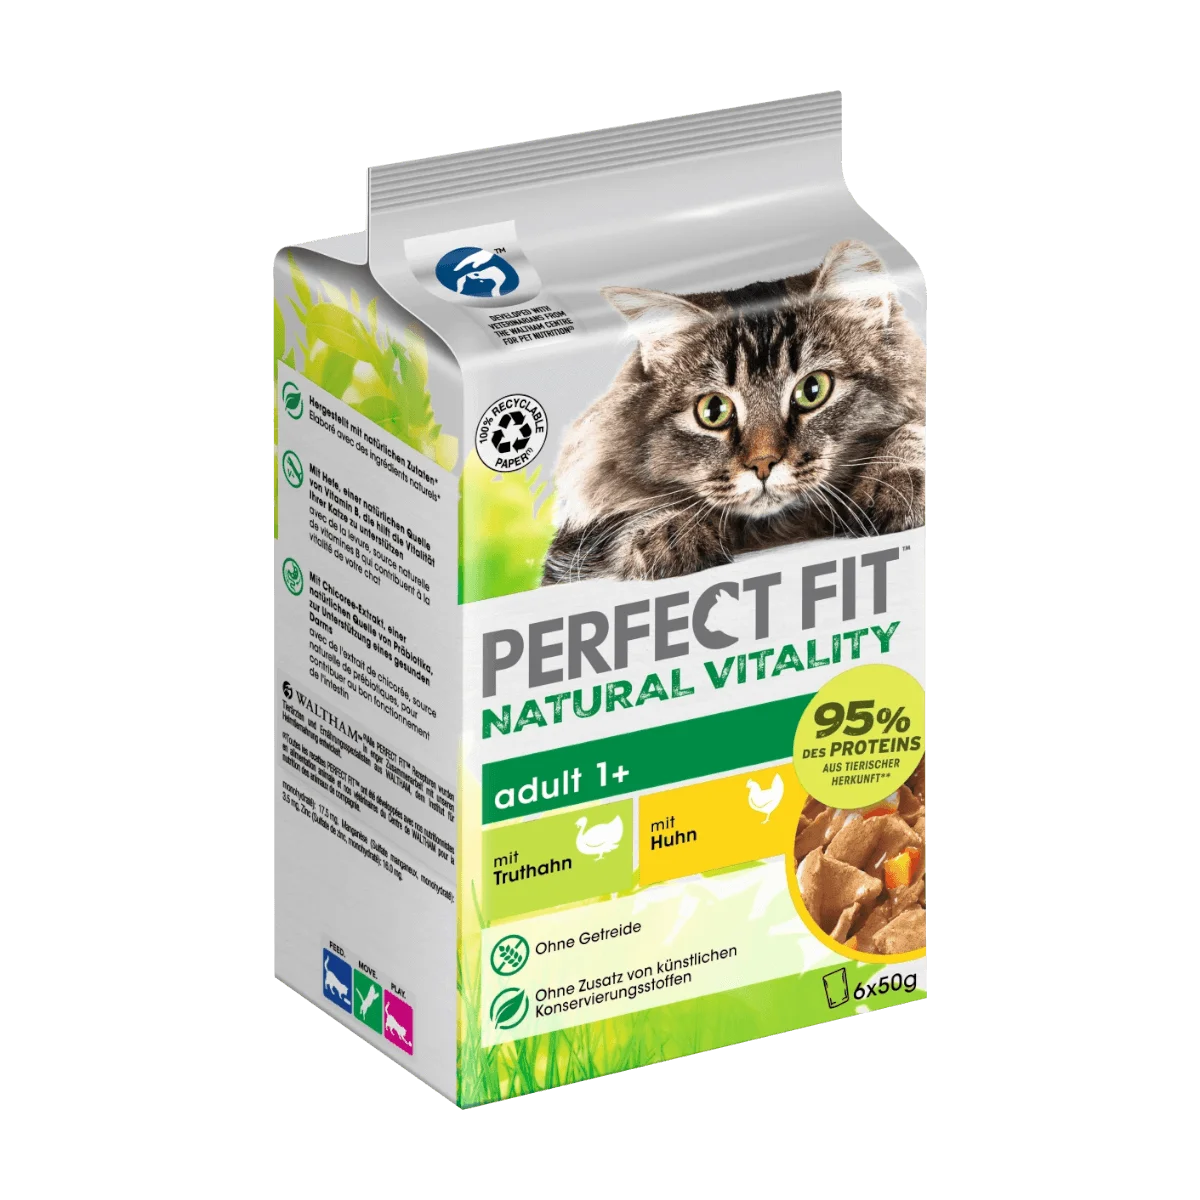 PERFECT FIT Nassfutter Katze mit Huhn & Truthahn, natural vitality, Multipack (6x50 g), 300 g